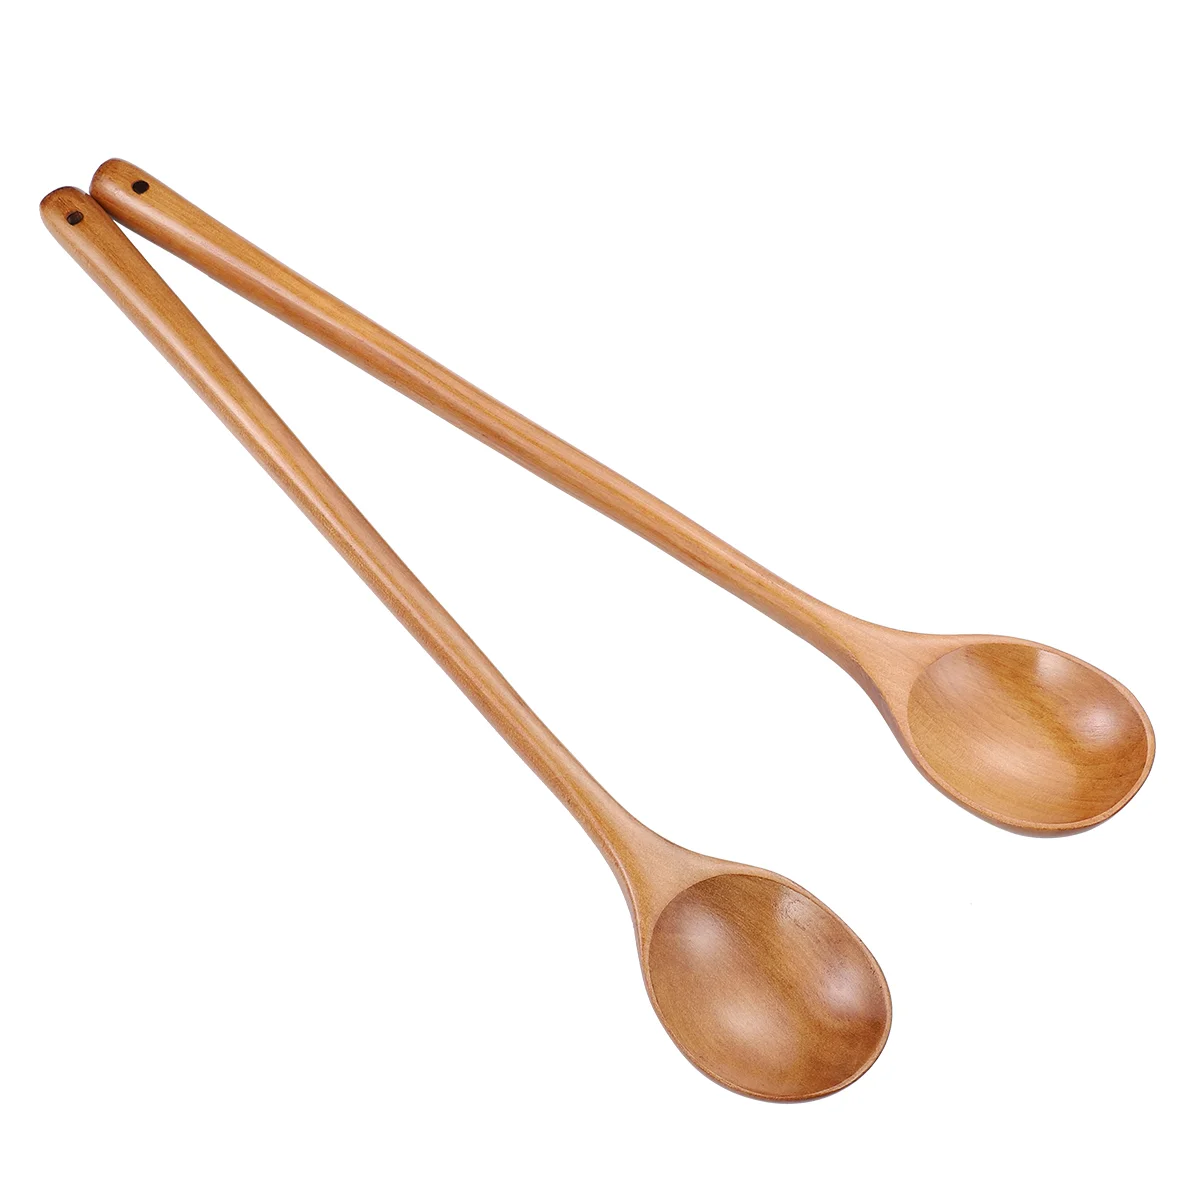 

Spoon Spoons Soup Ladle Wooden Cooking Wood Handle Kitchenserving Mixing Tool Hot Retro Ramen Tasting Honey Rice Fruit Jelly